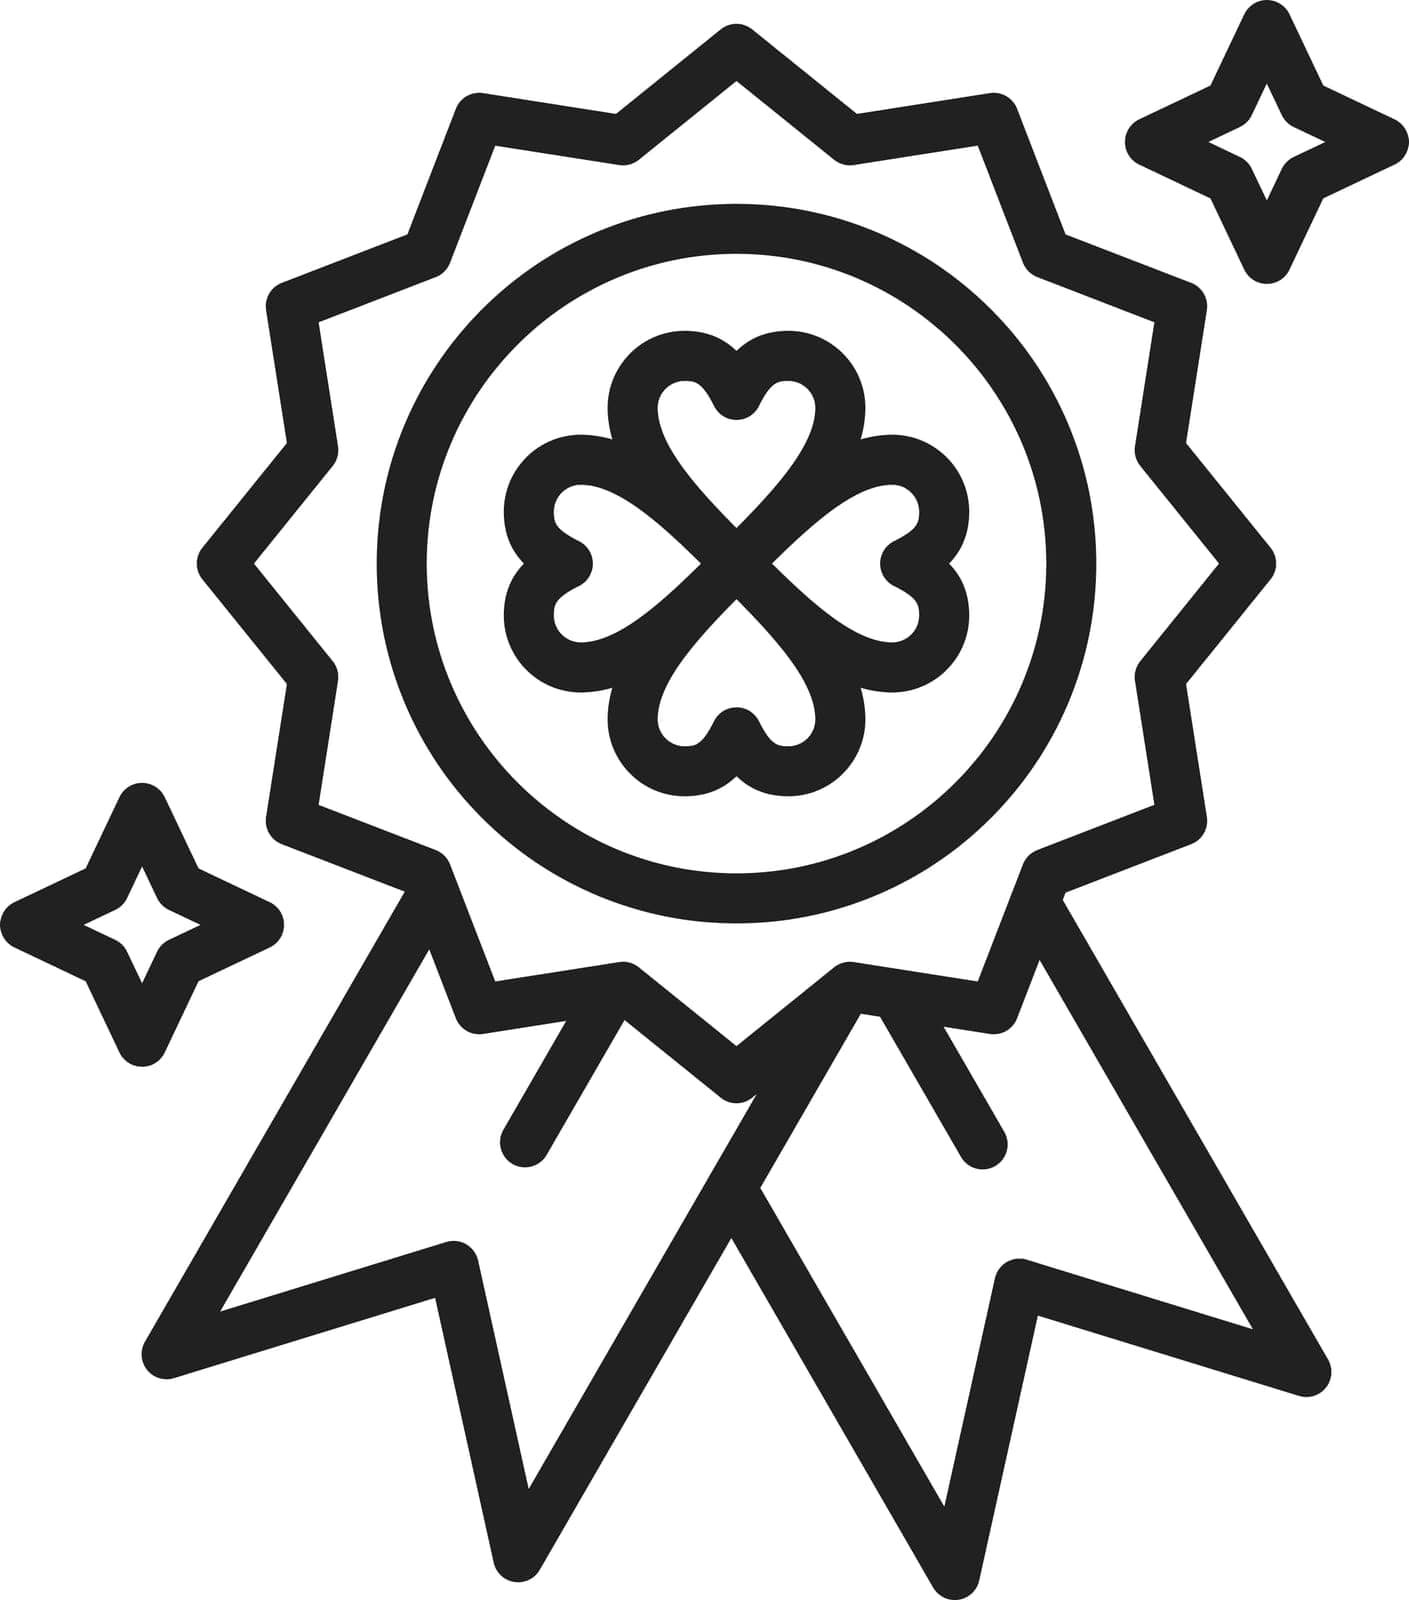 Medal Icon image. Suitable for mobile application.